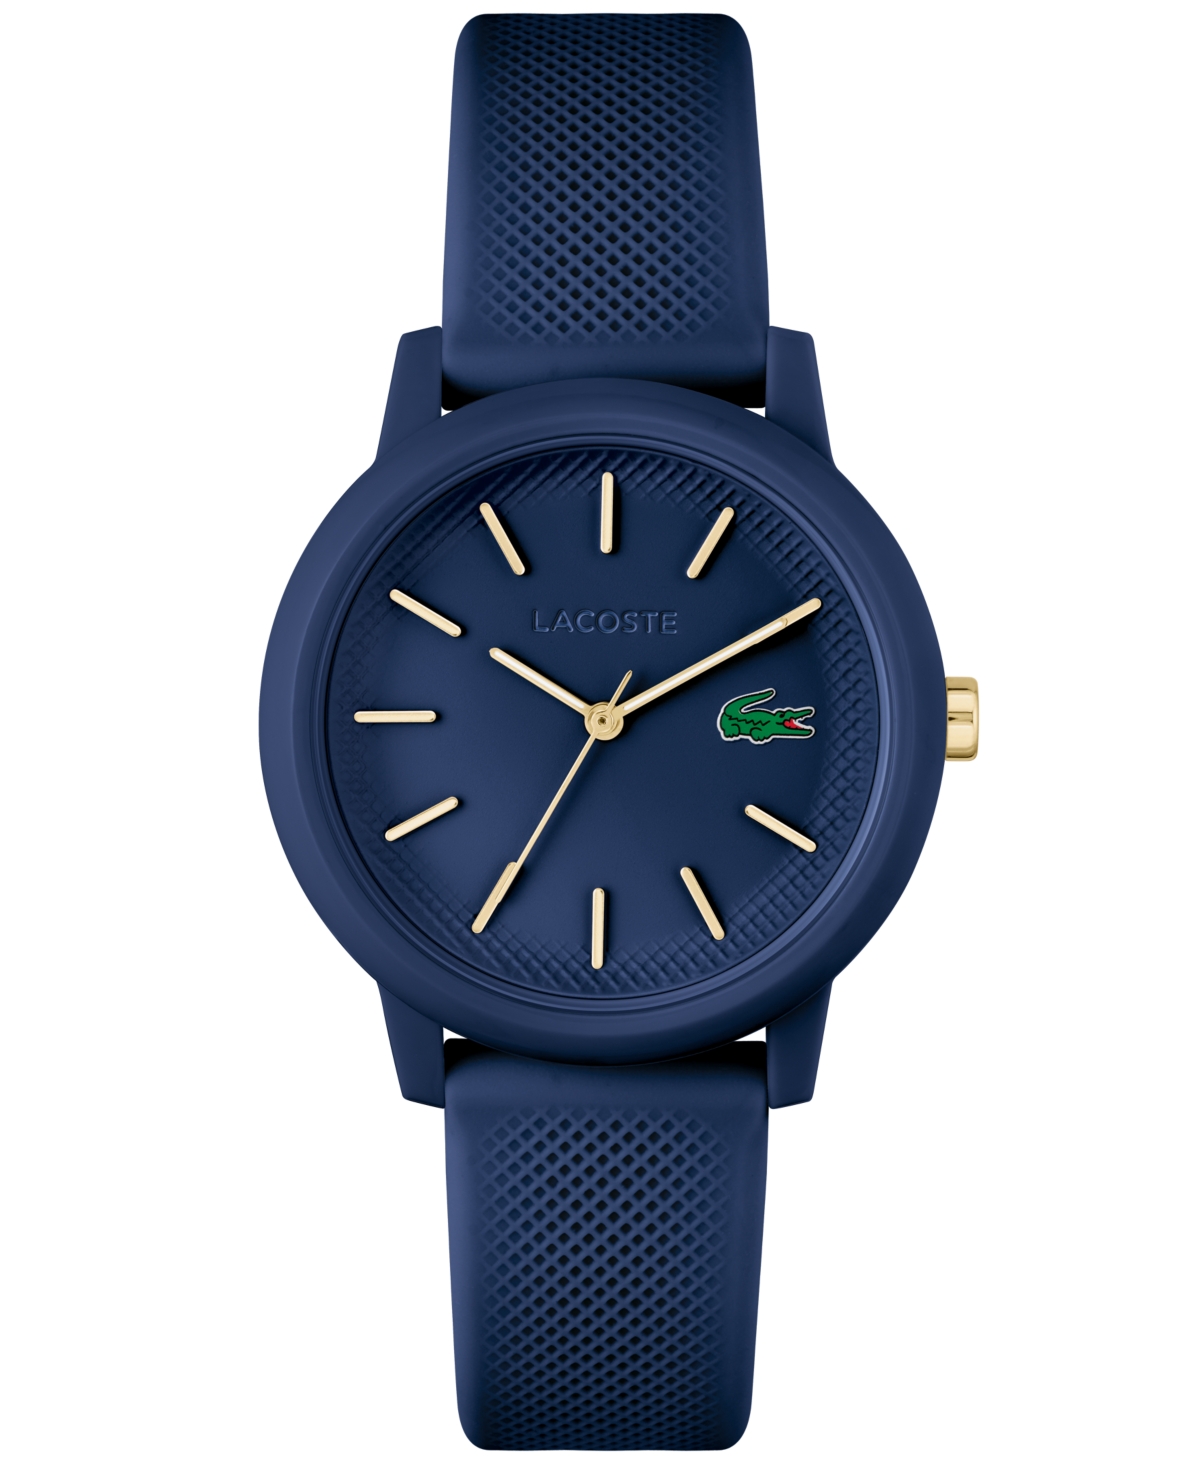 LACOSTE WOMEN'S L.12.12 NAVY SILICONE STRAP WATCH 36MM WOMEN'S SHOES